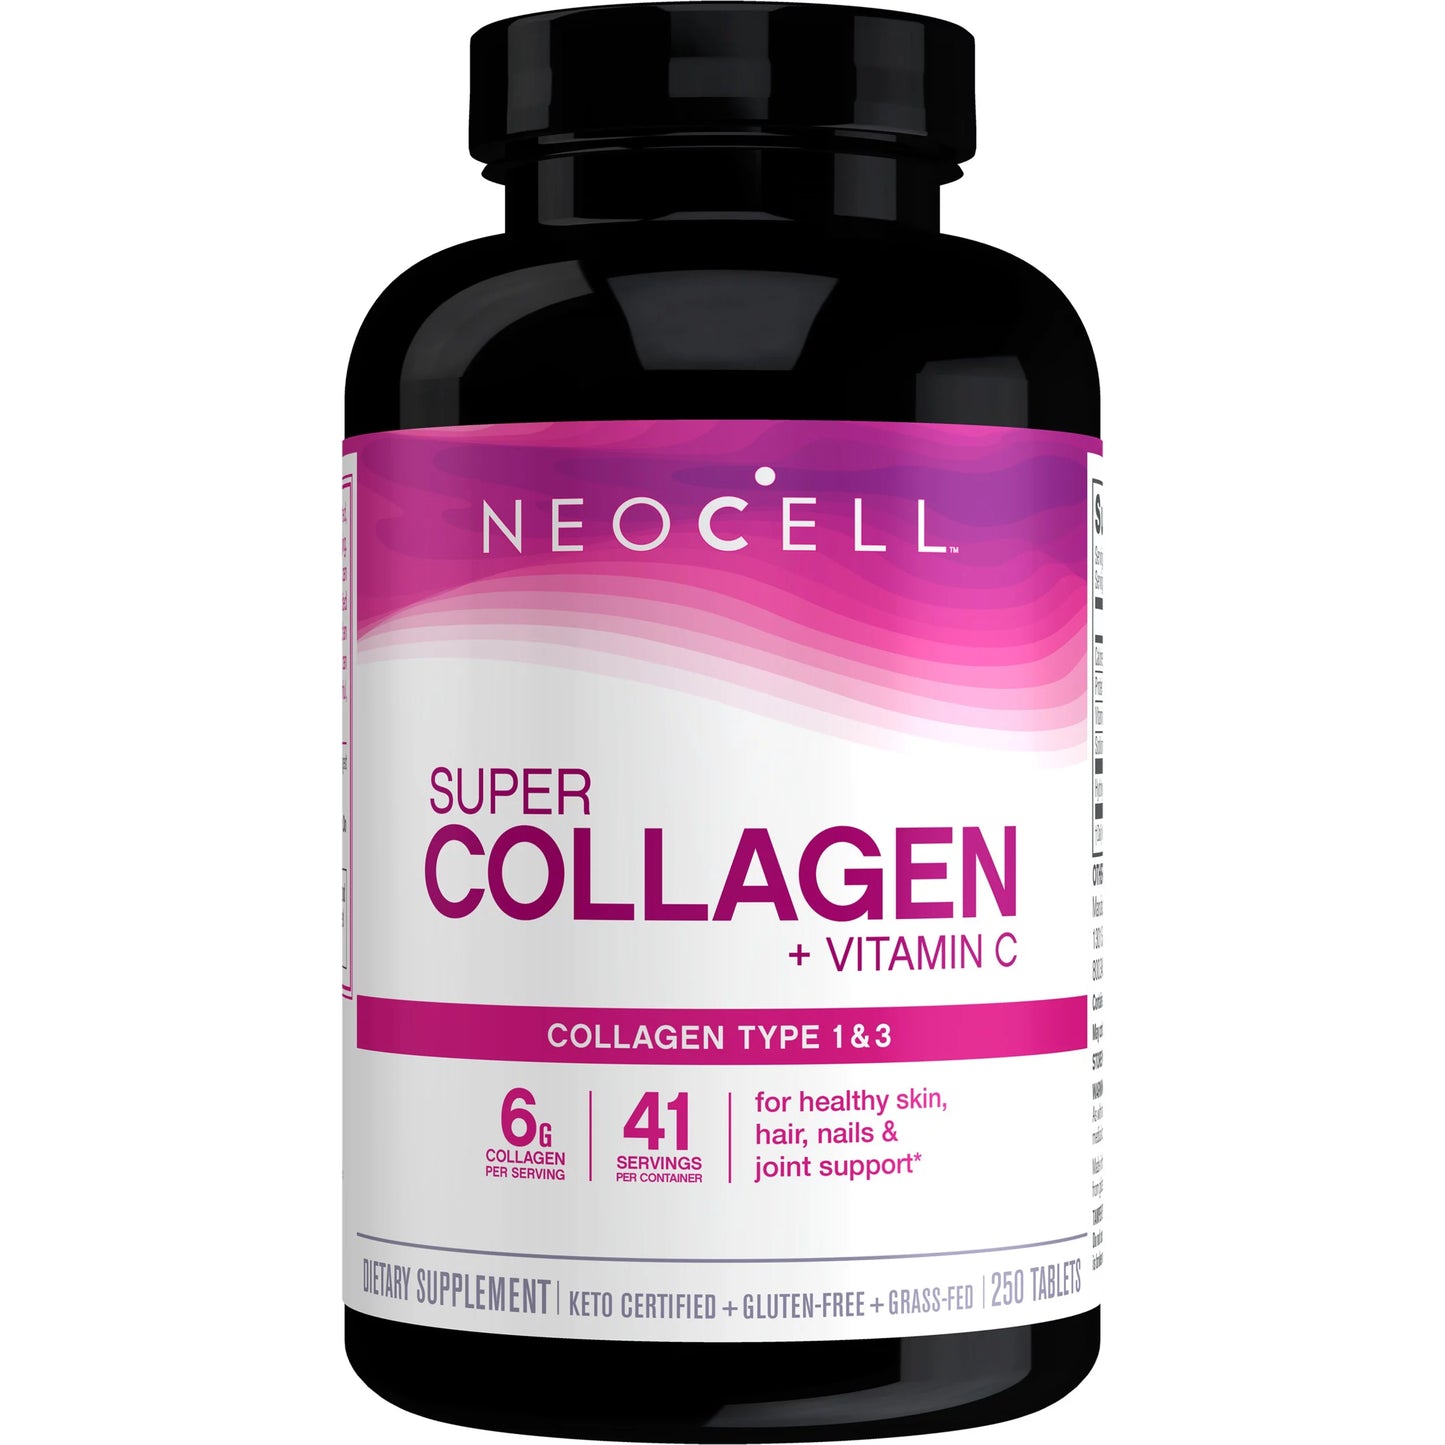 Neocell - Super Collagen + C, Type 1 & 3, 250 Tablets